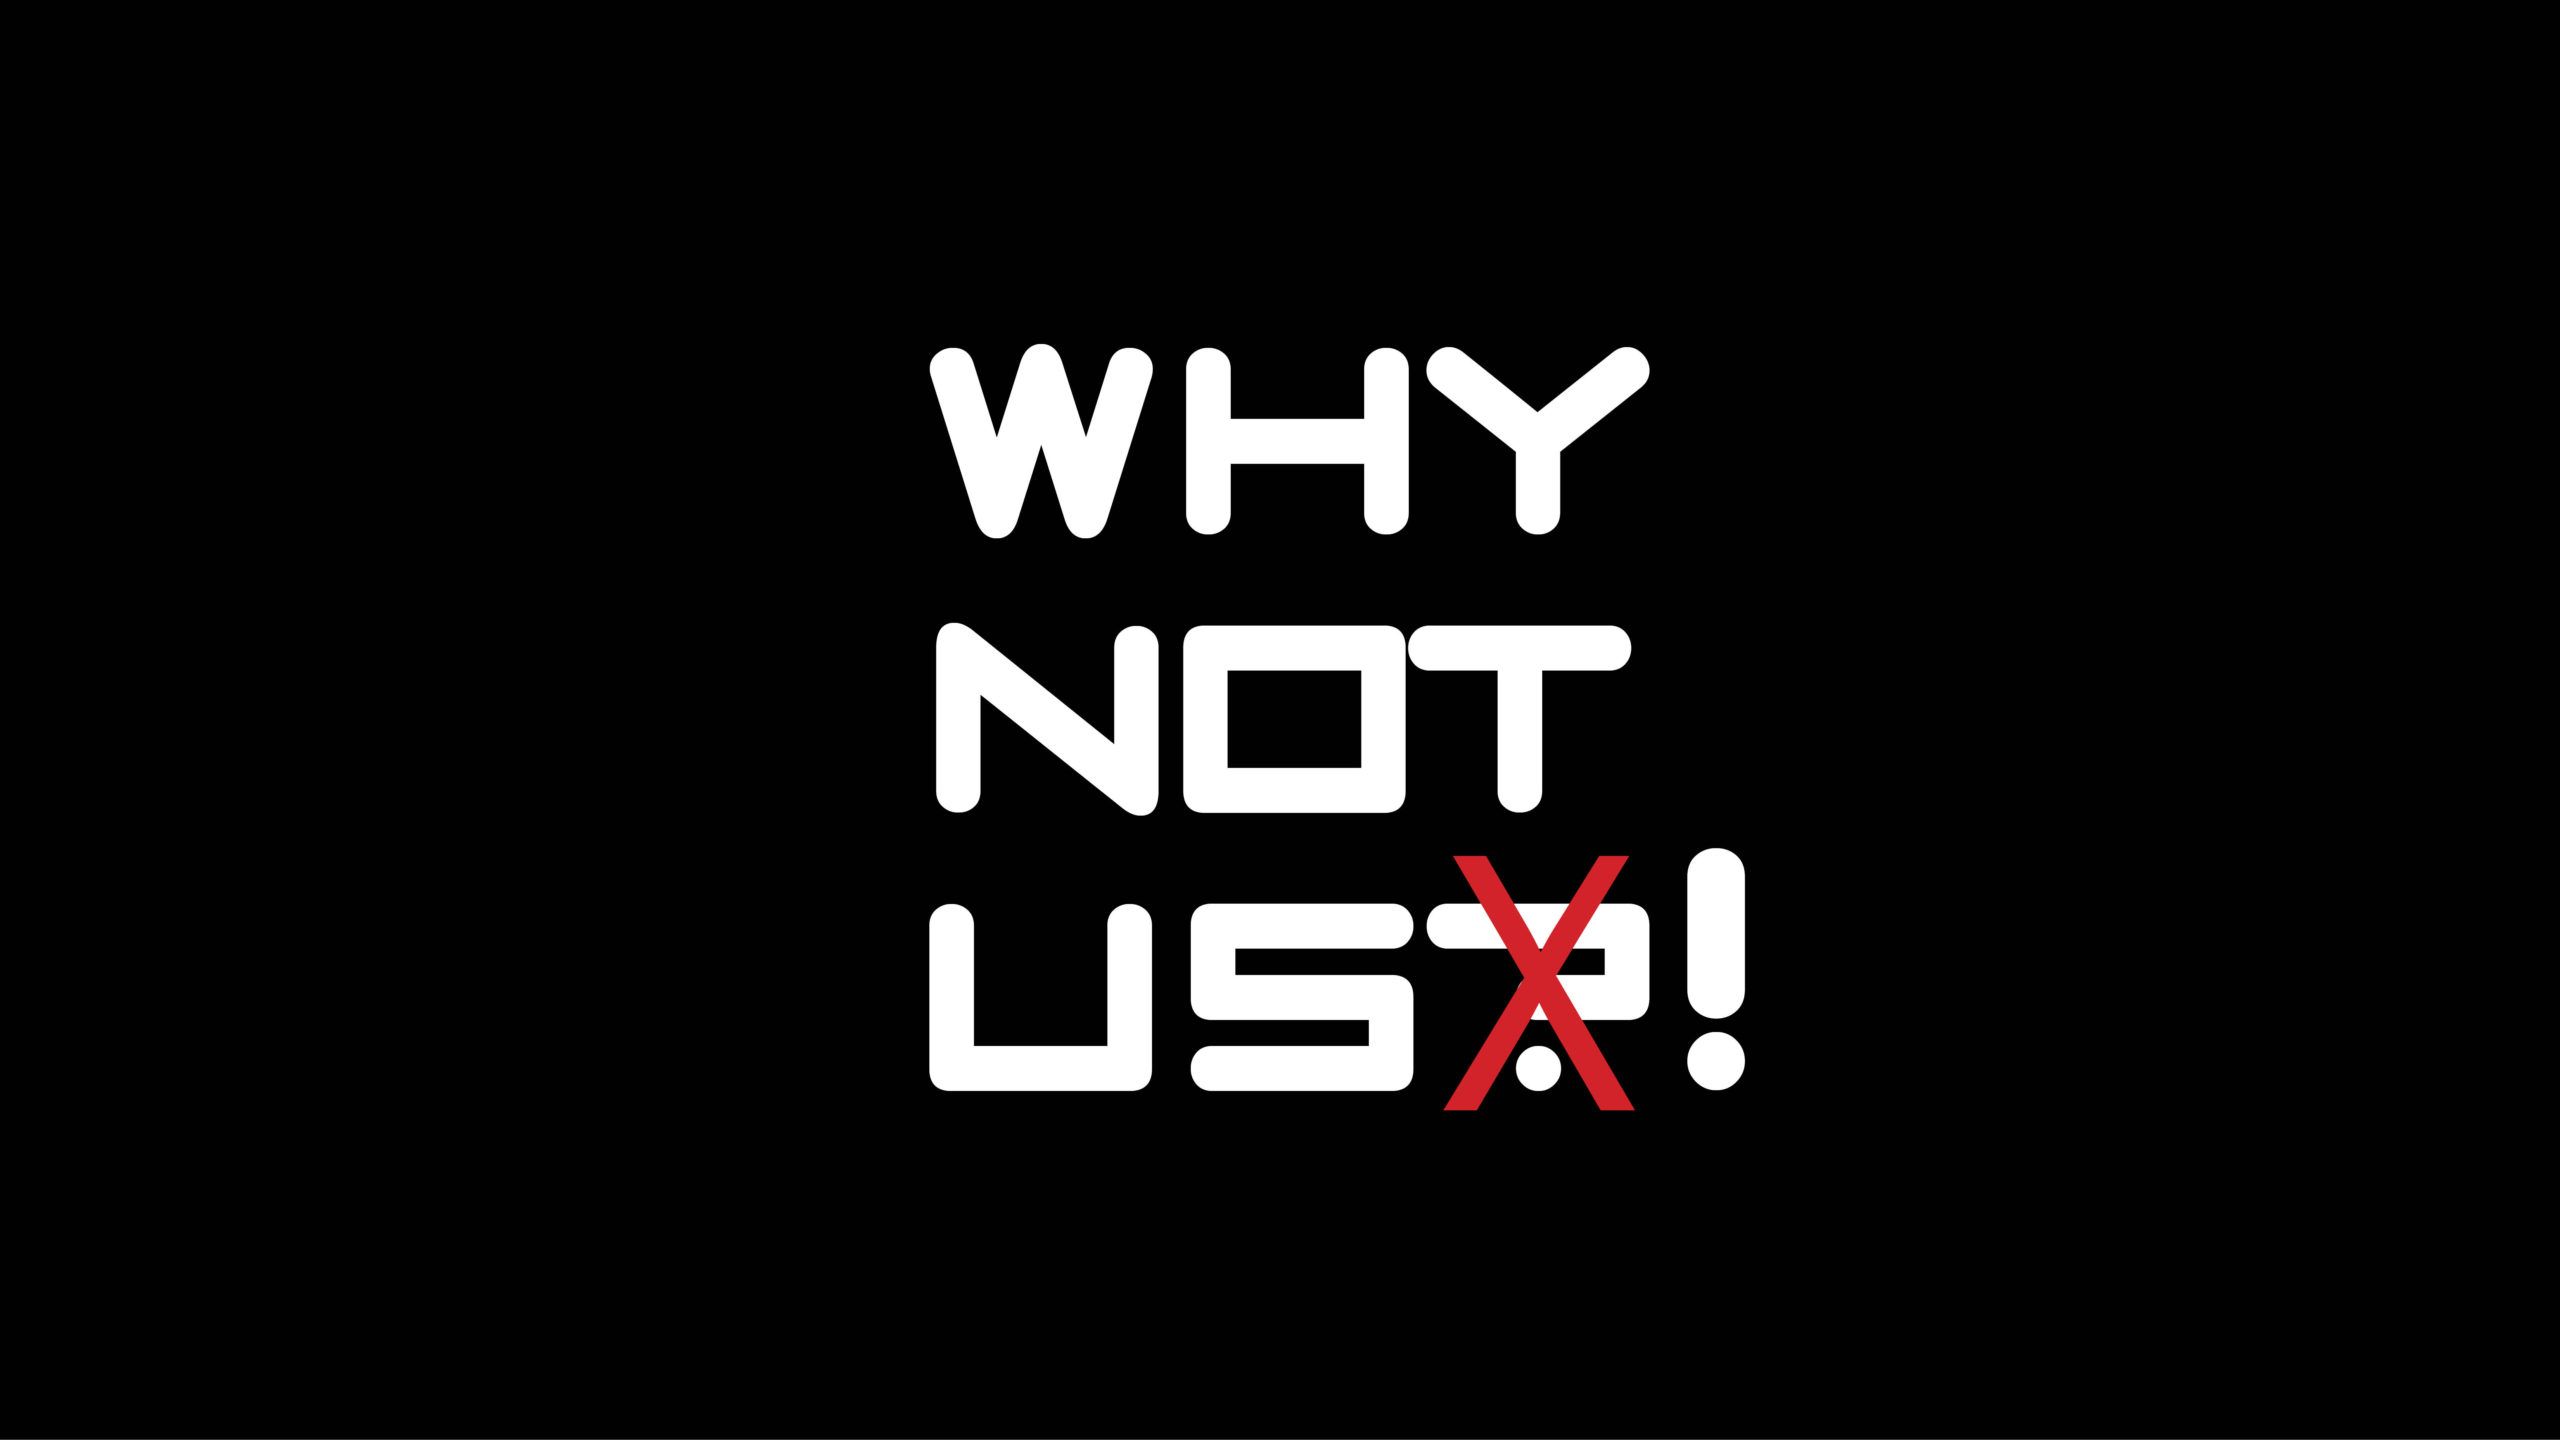 Why Not Us! – Part 3